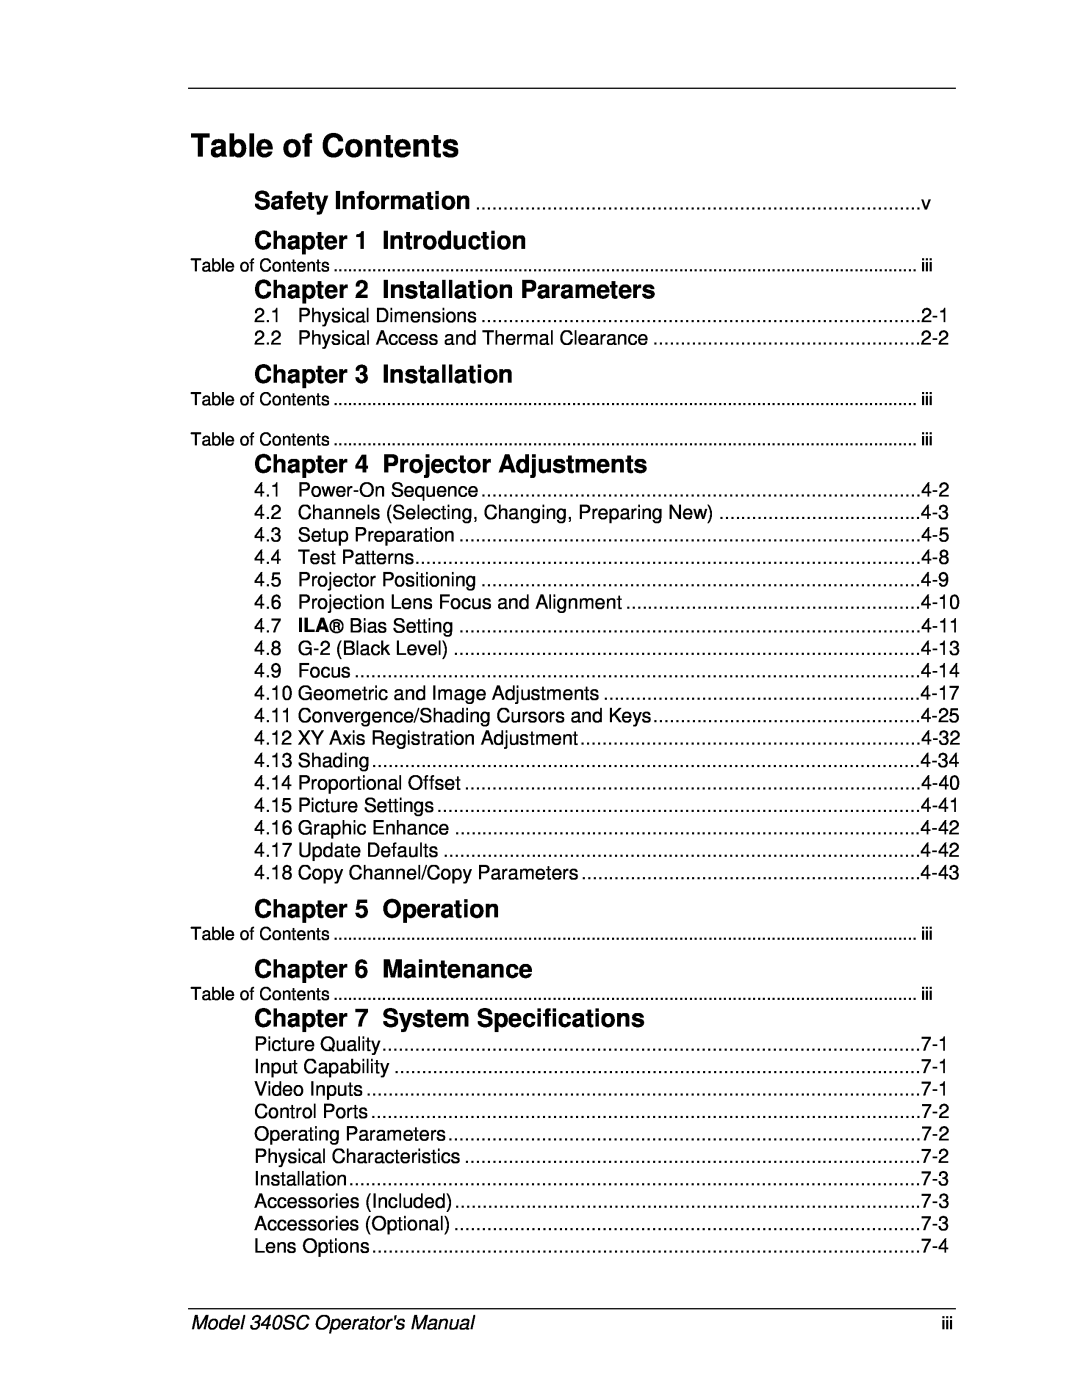 JVC 340SC manual Table of Contents 